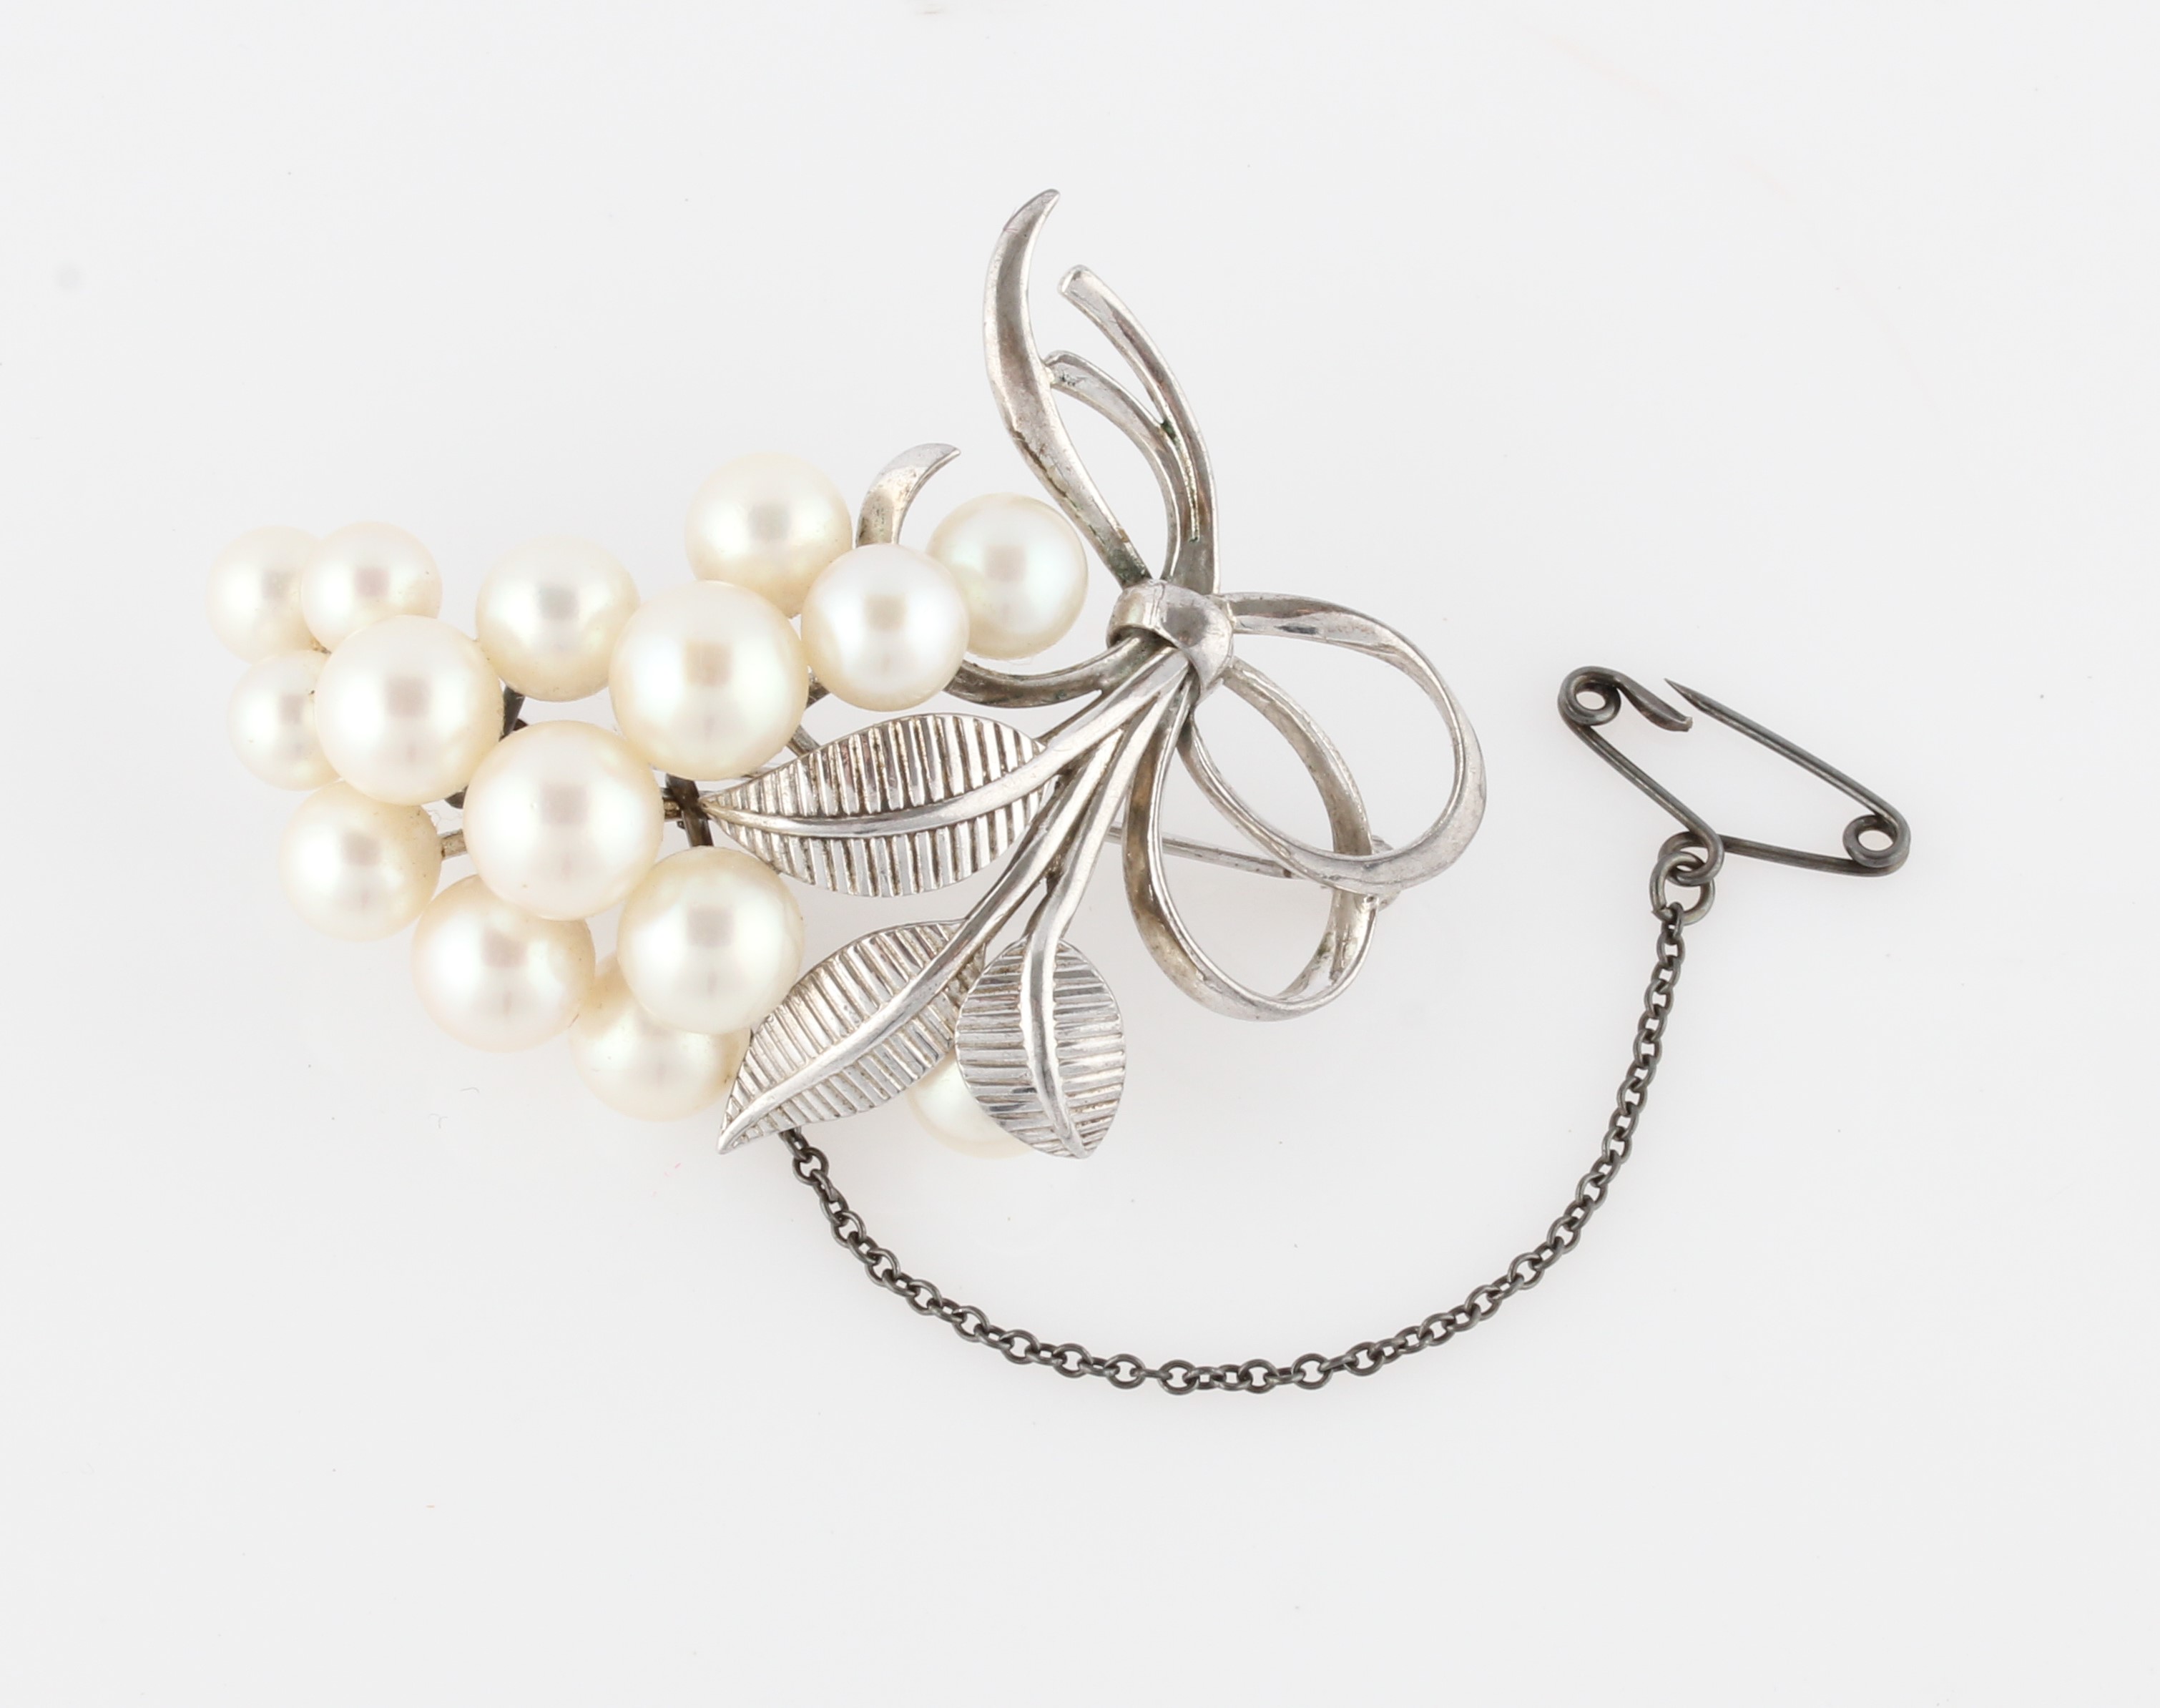 A Mikimoto pearl brooch, set with fifteen variously sized pearls, smallest measuring approx. 5.5mm